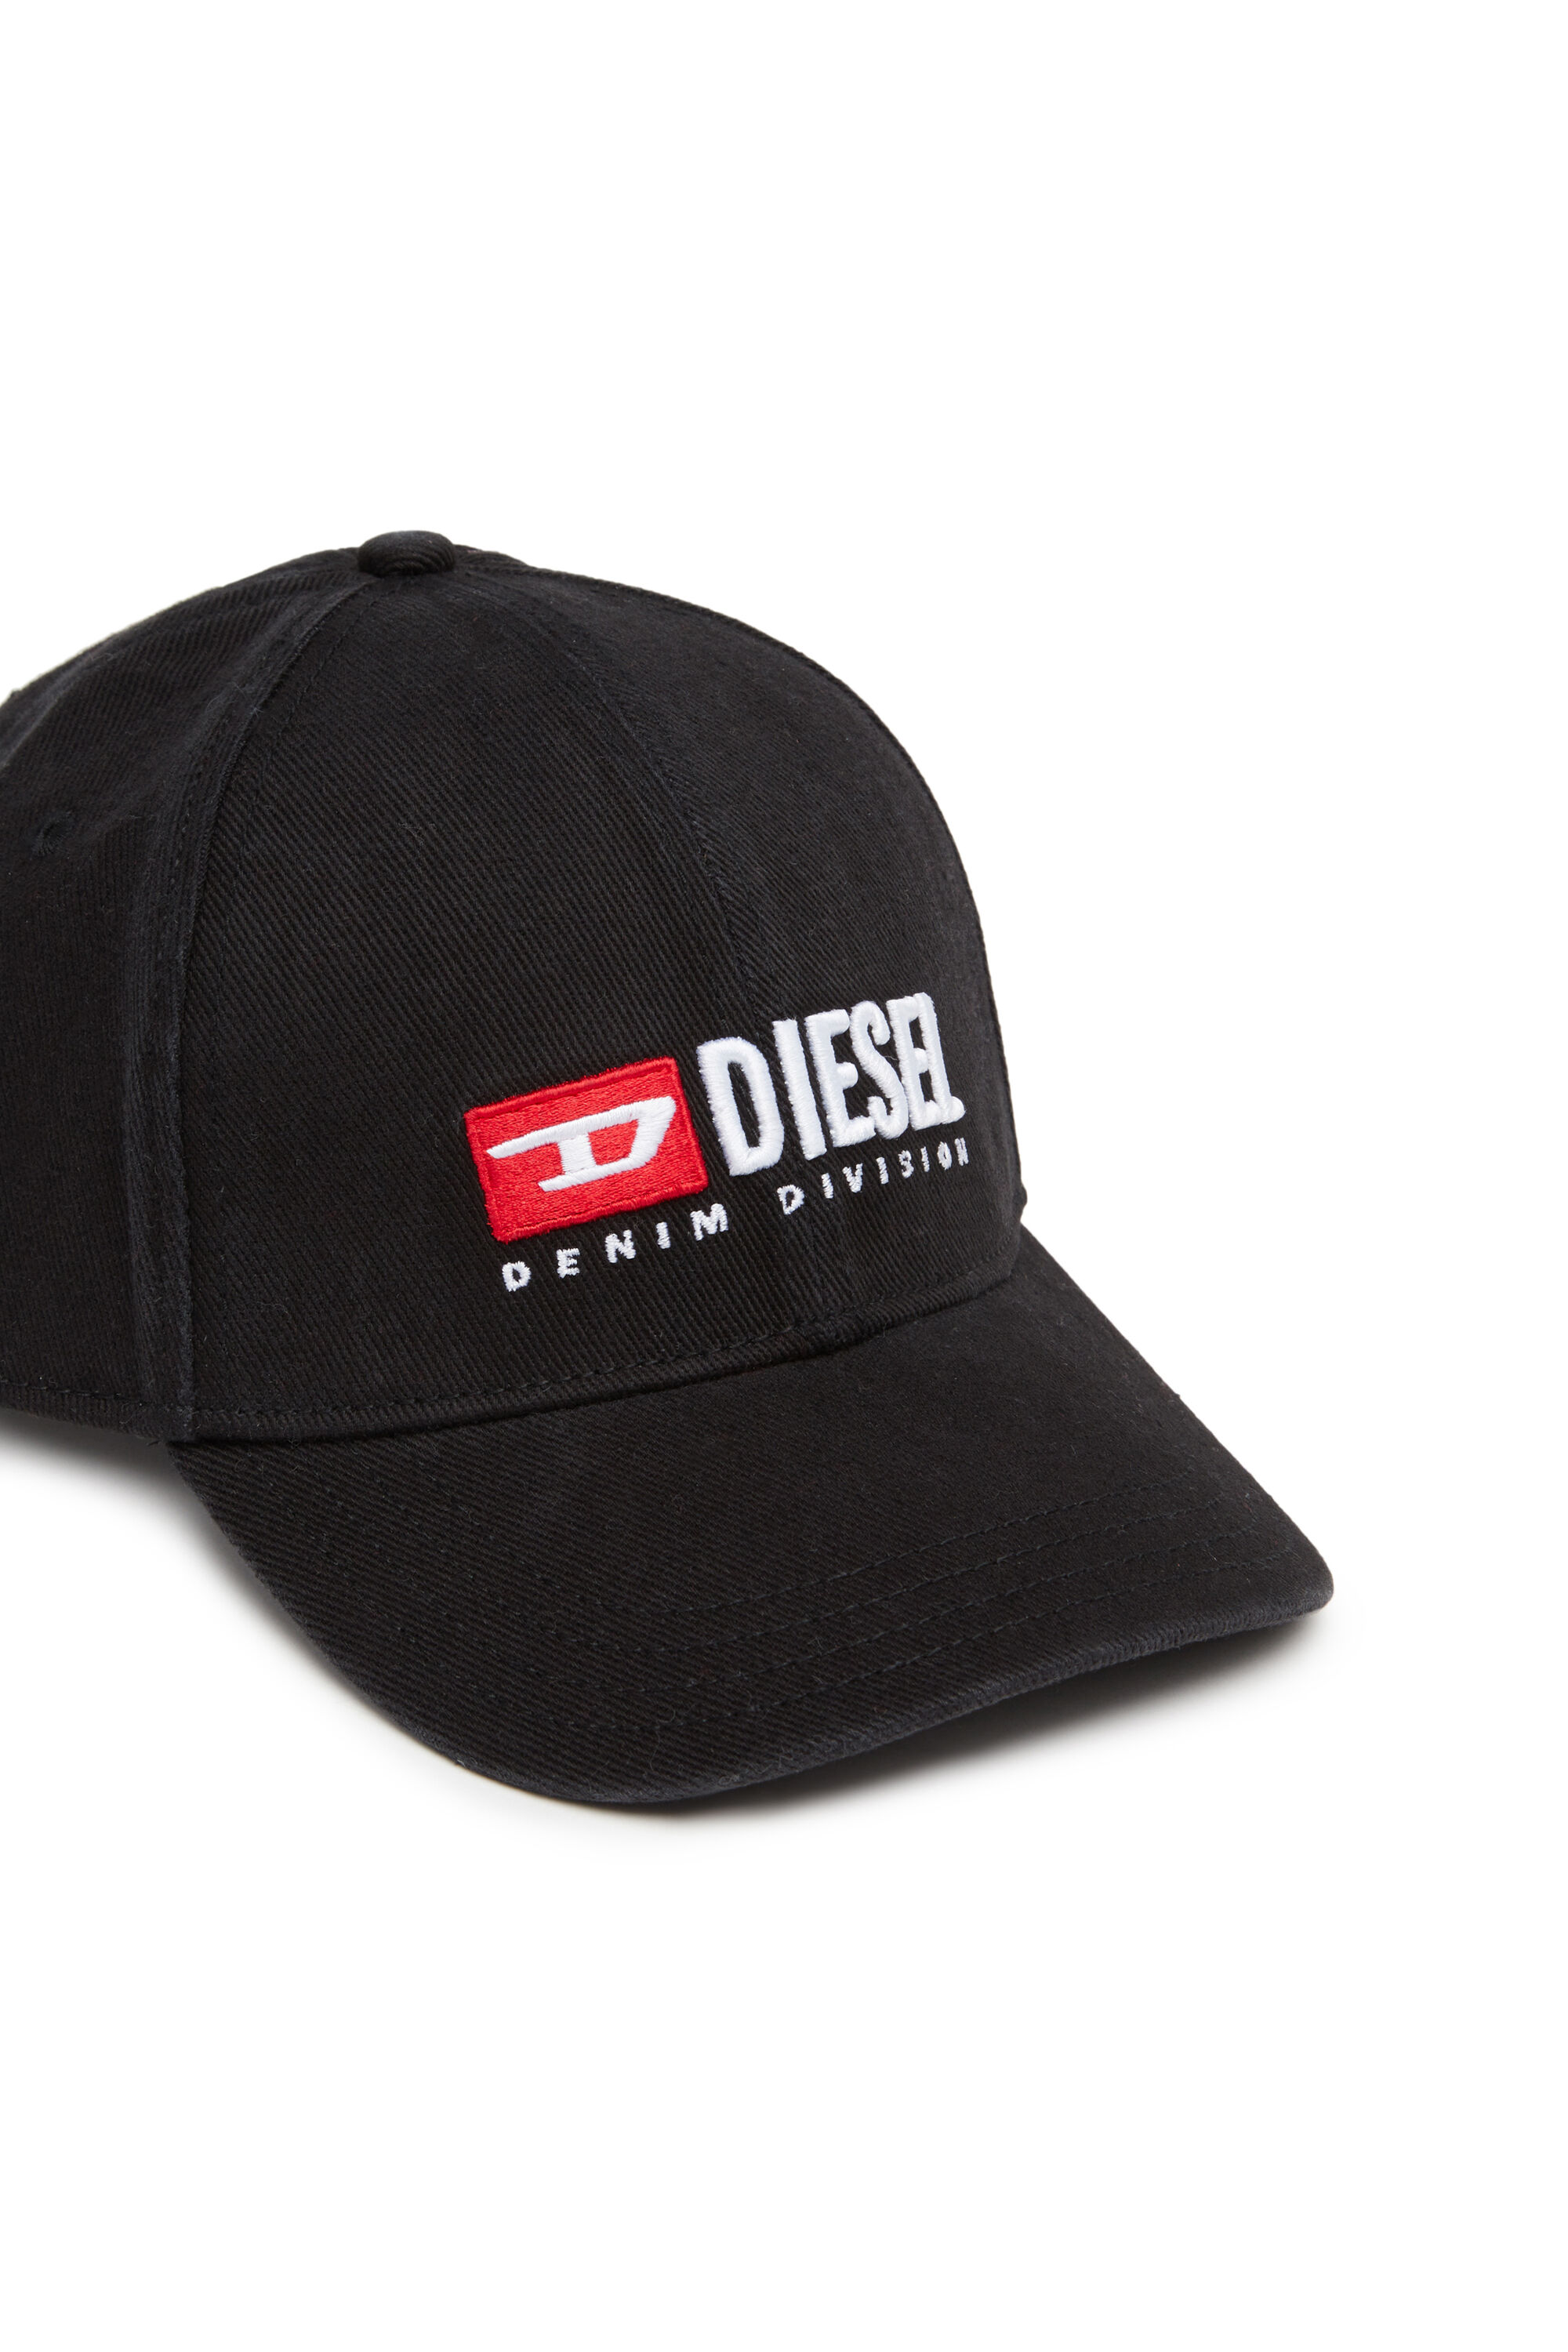 Men's Baseball cap with logo embroidery | Diesel CORRY-DIV-WASH